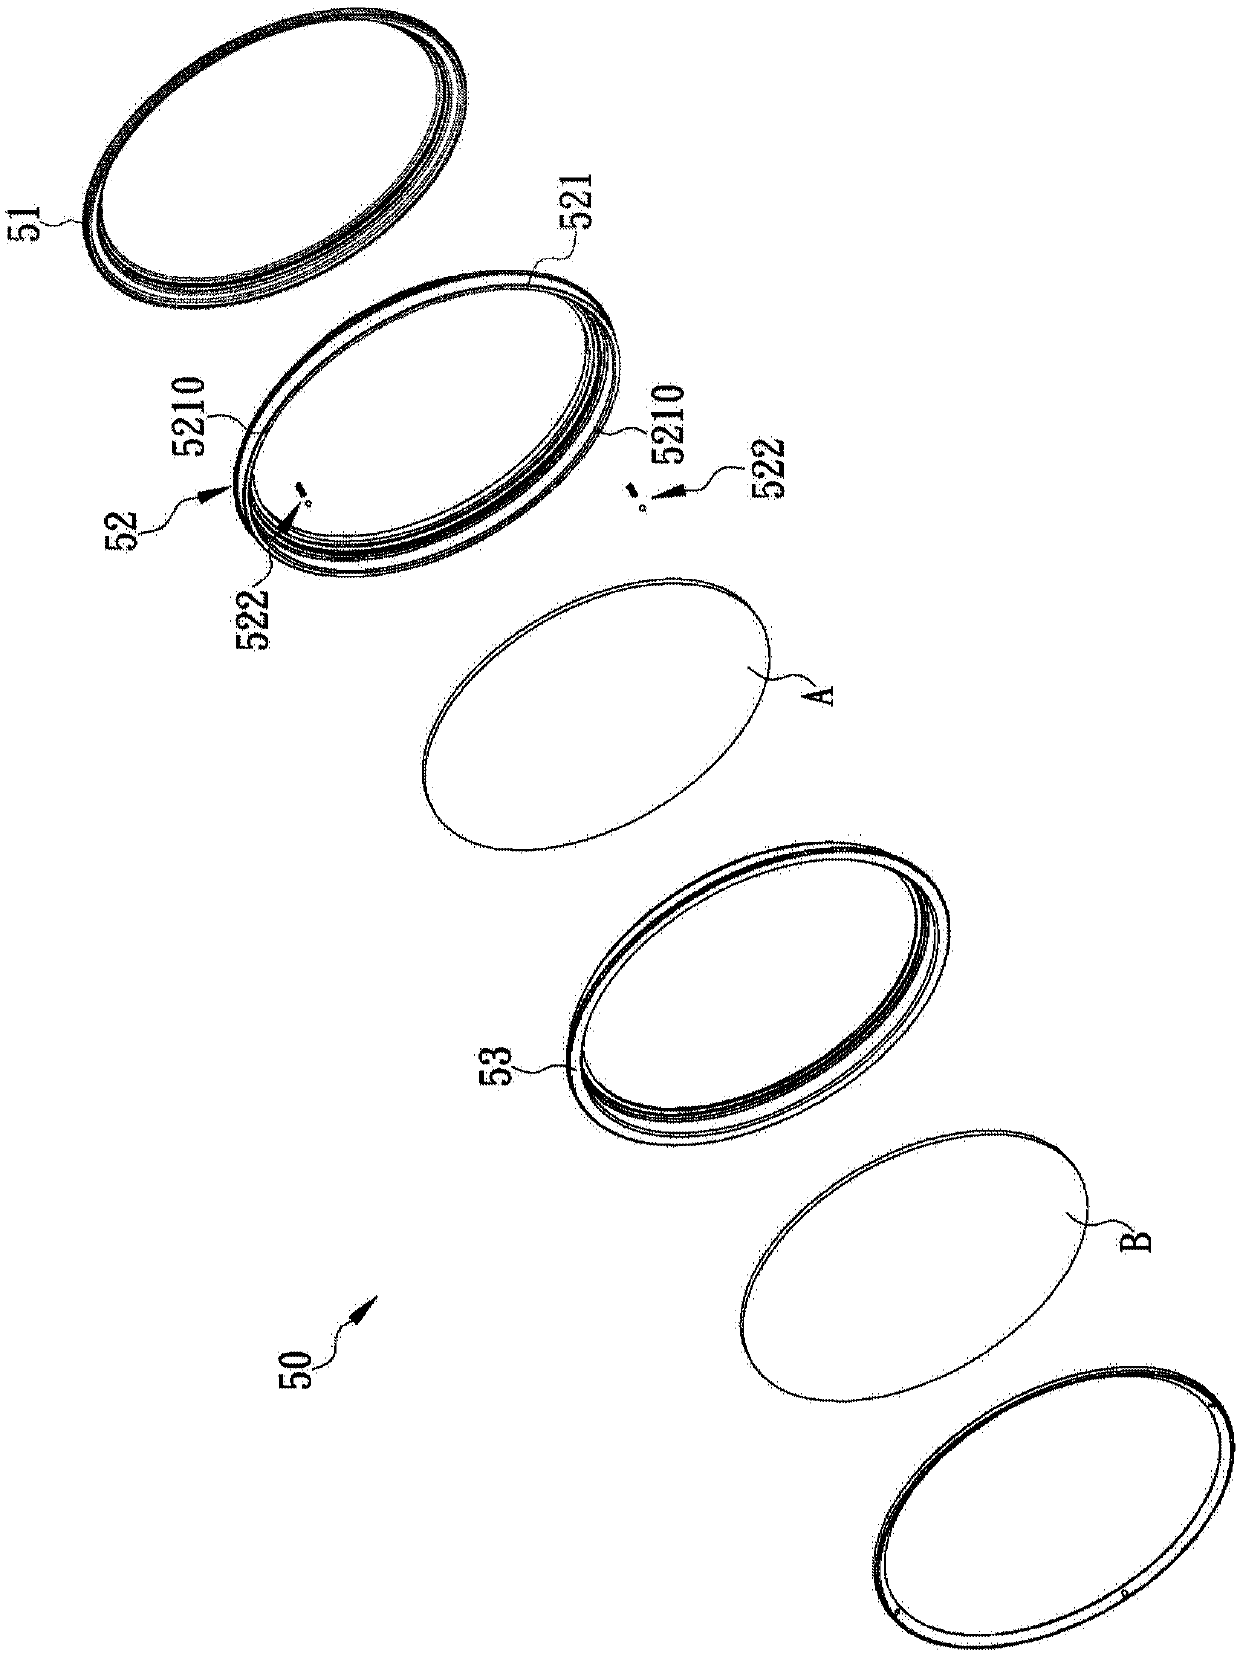 Adjustable multi-ring polarizing and dimming lens group axially located through elastic embedding and locking component